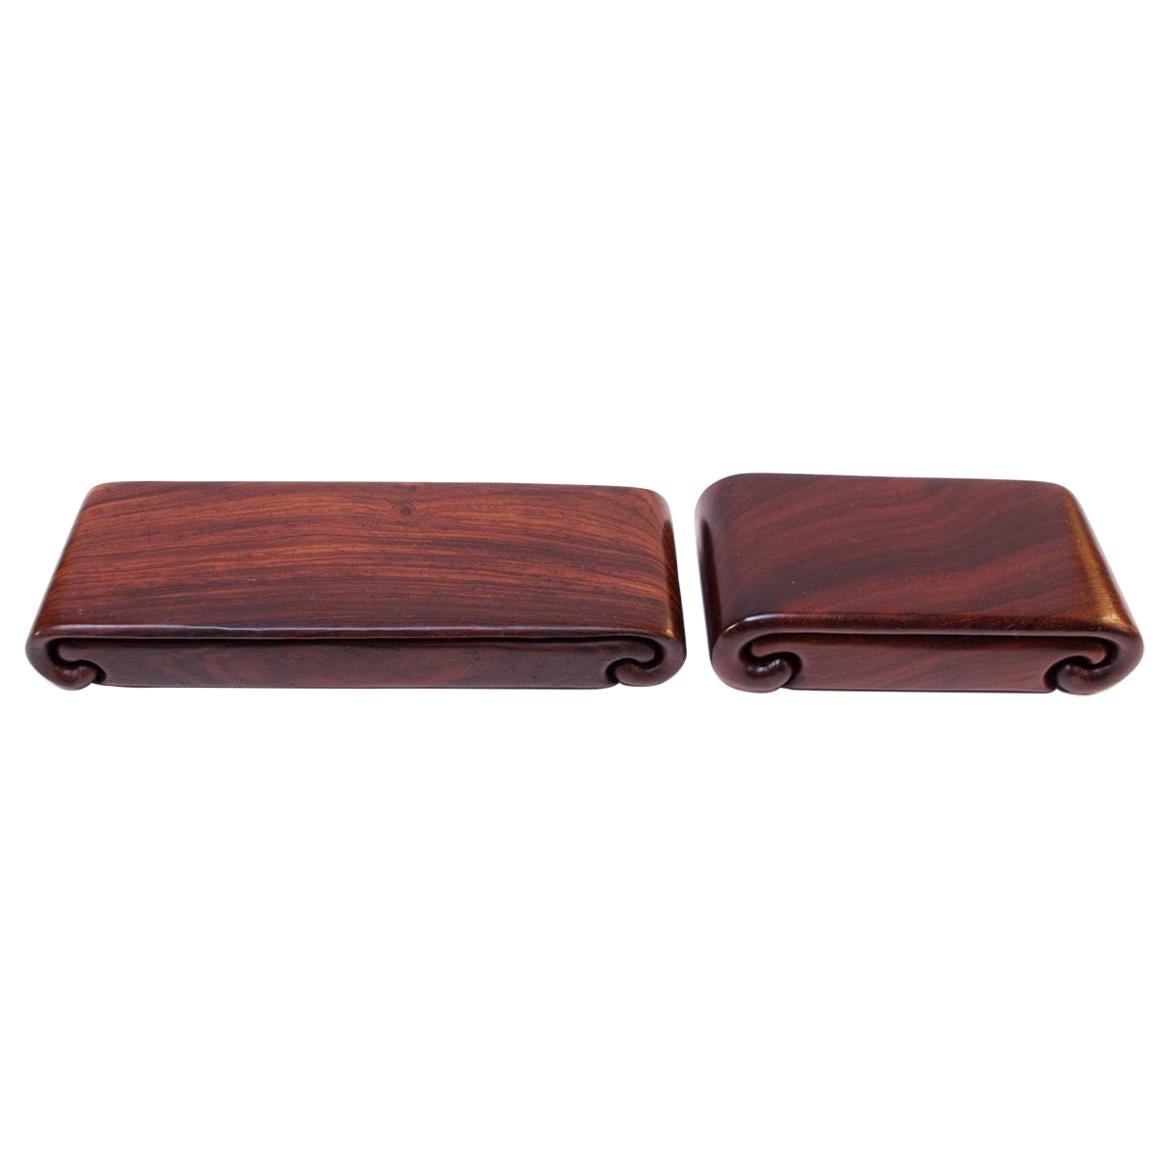 Duo of Sculptural Rosewood Jewelry Boxes by Richard Rothbard For Sale